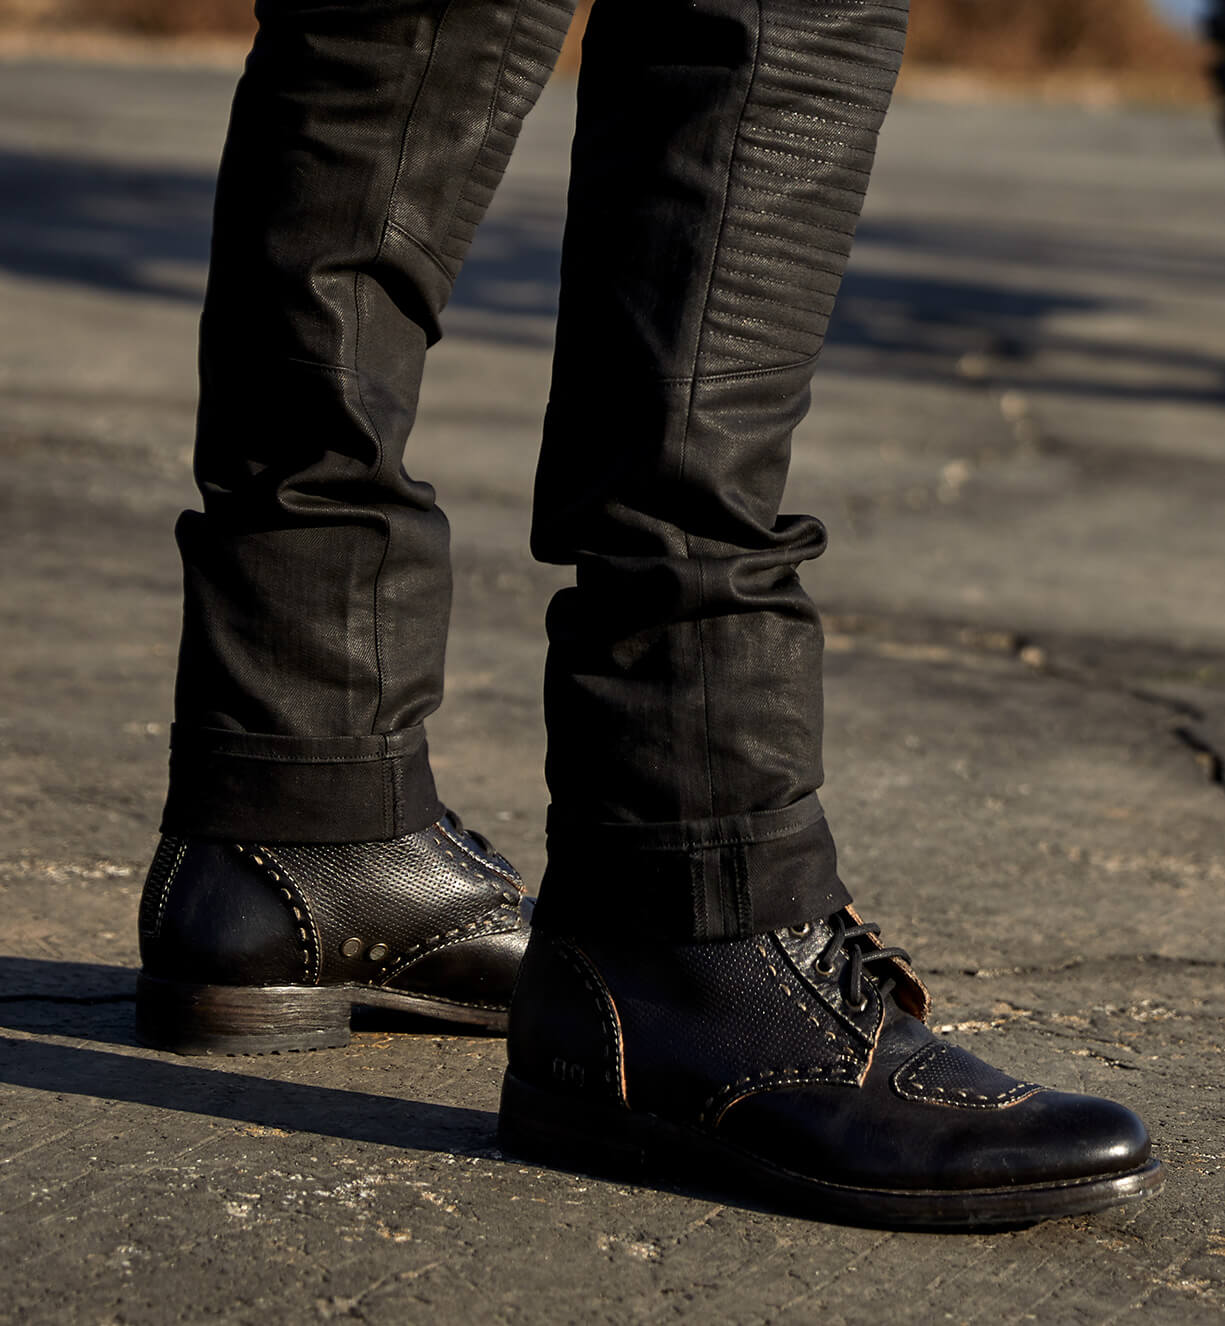 A person standing in a pair of Bed Stu Walker Tan Rustic Mason BFS Boots paired with black wrinkled pants on a cracked surface.